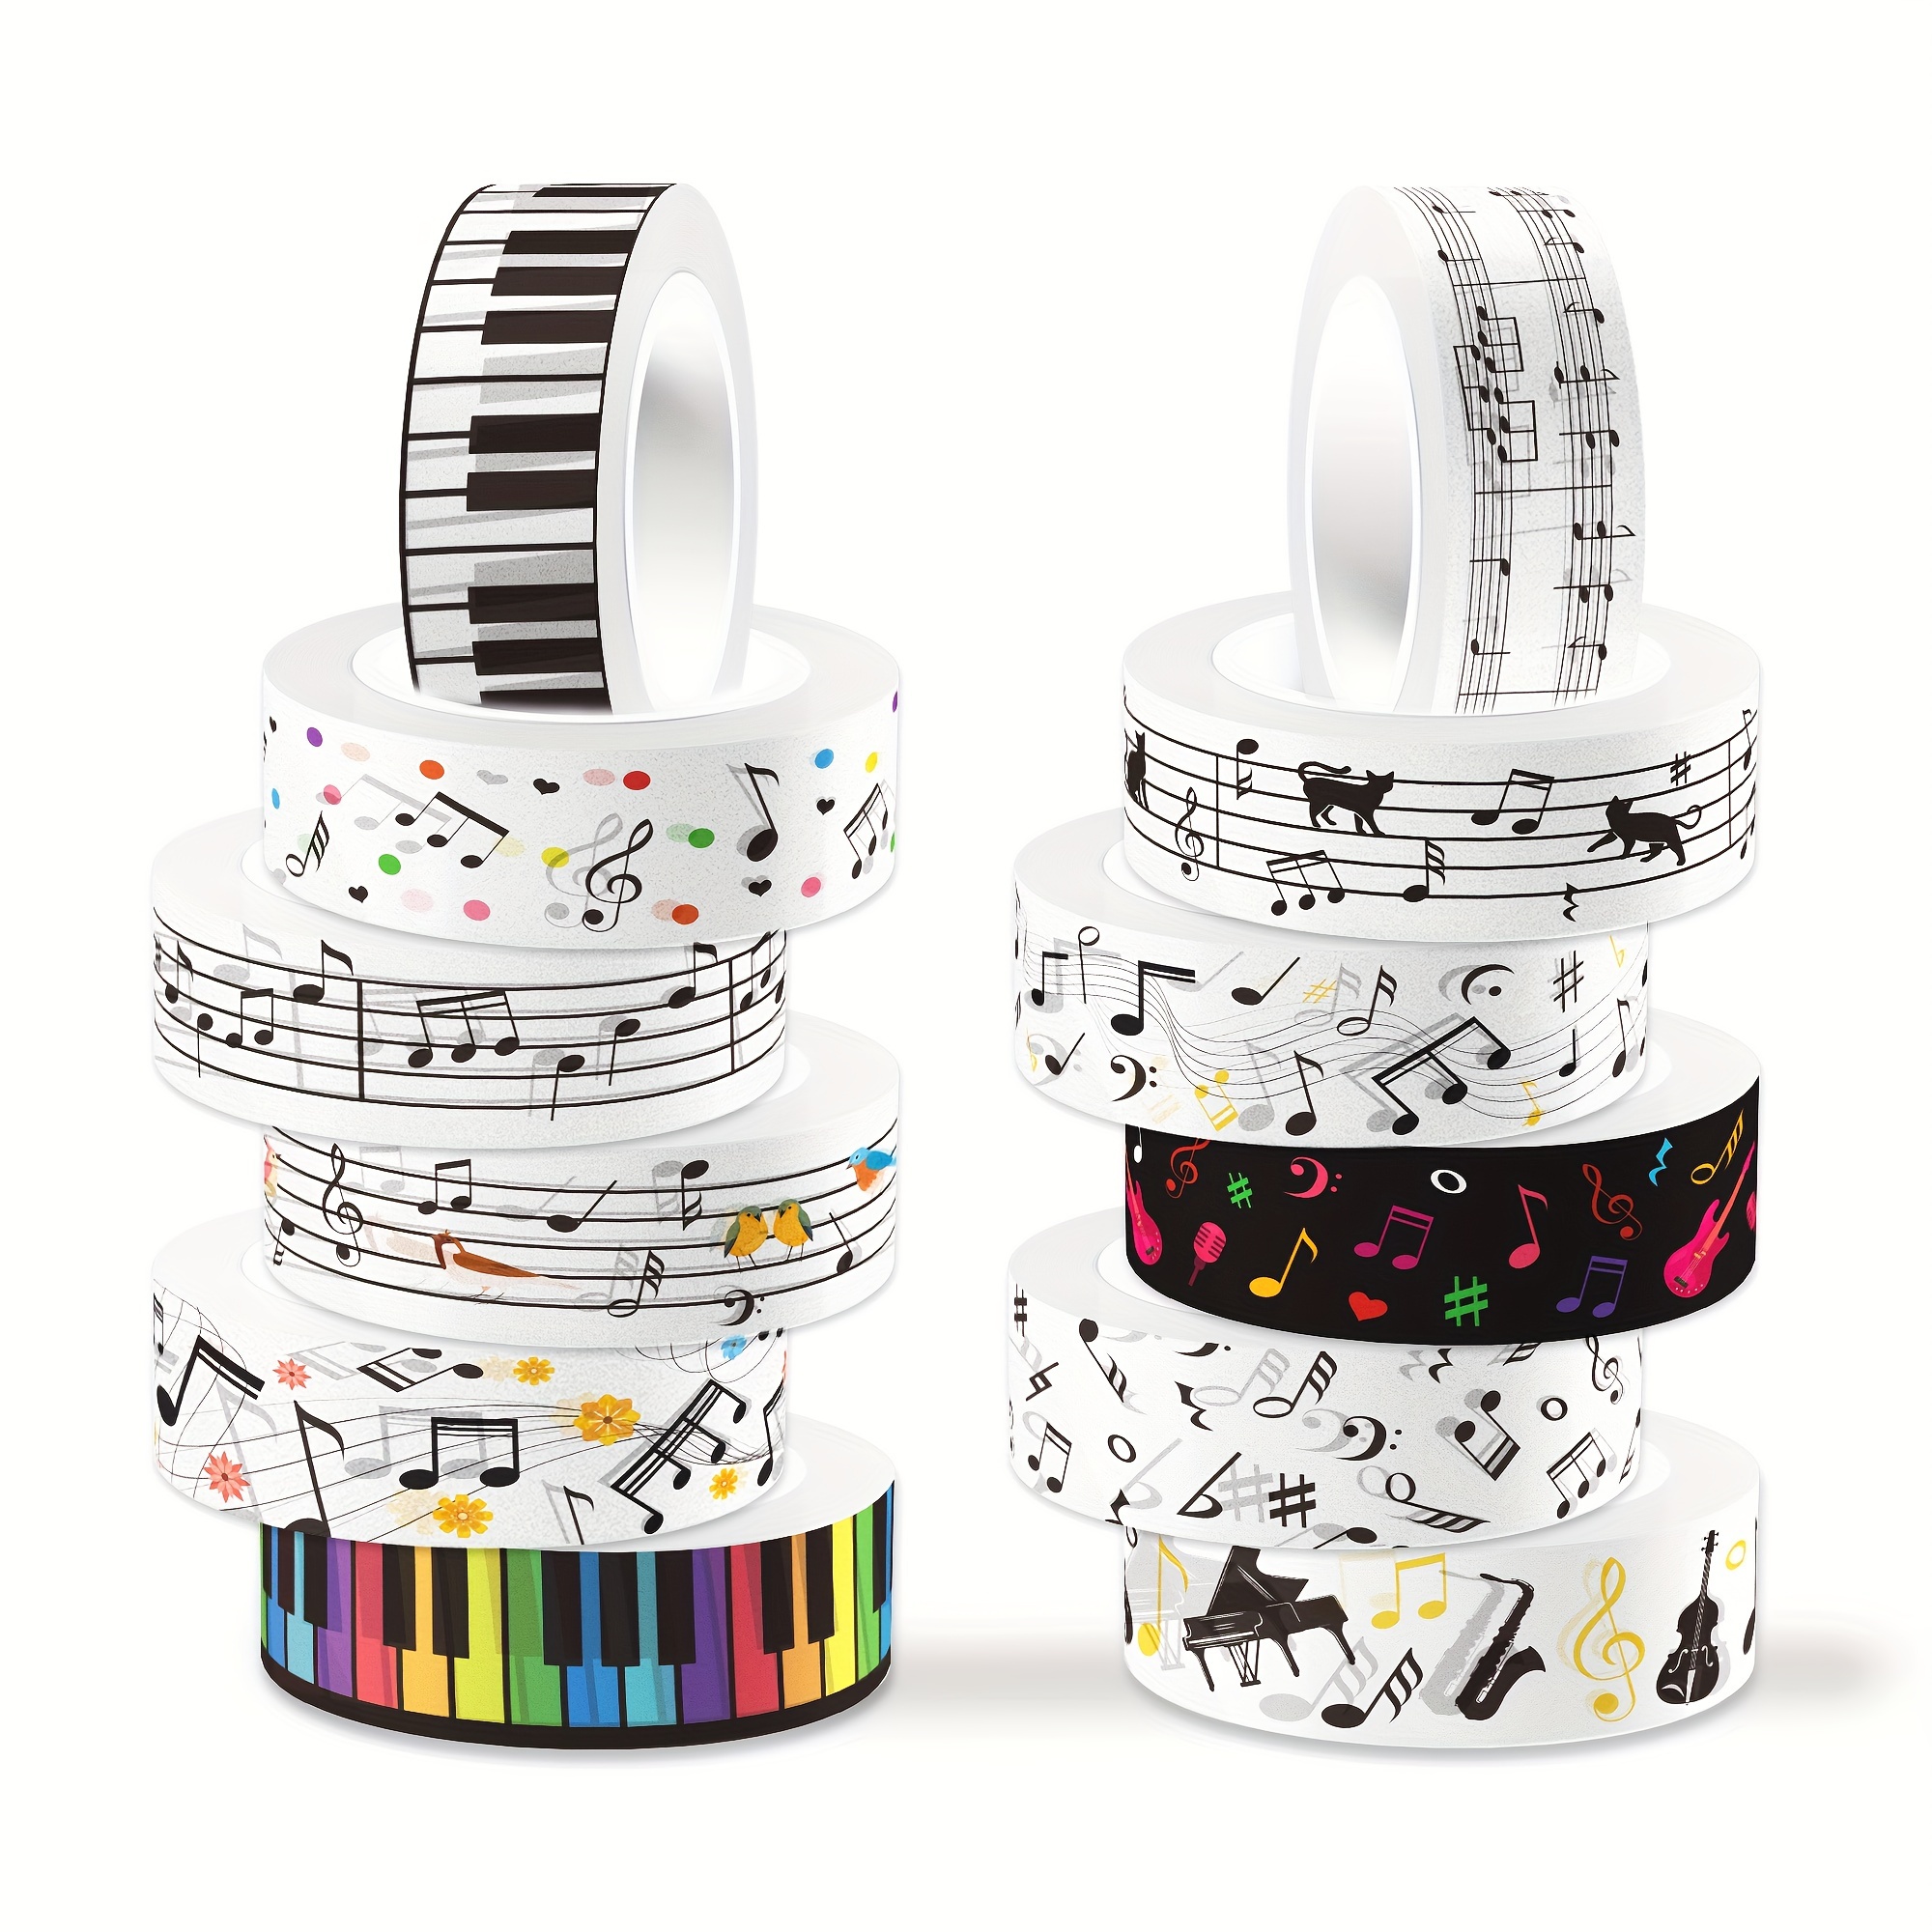 

12 Rolls Music Themed Washi Tape Set - Decorative Paper Sticky Tapes For Scrapbooking, Diy Crafts, Gift Wrapping, Mixed Designs With Musical Notes & Instruments